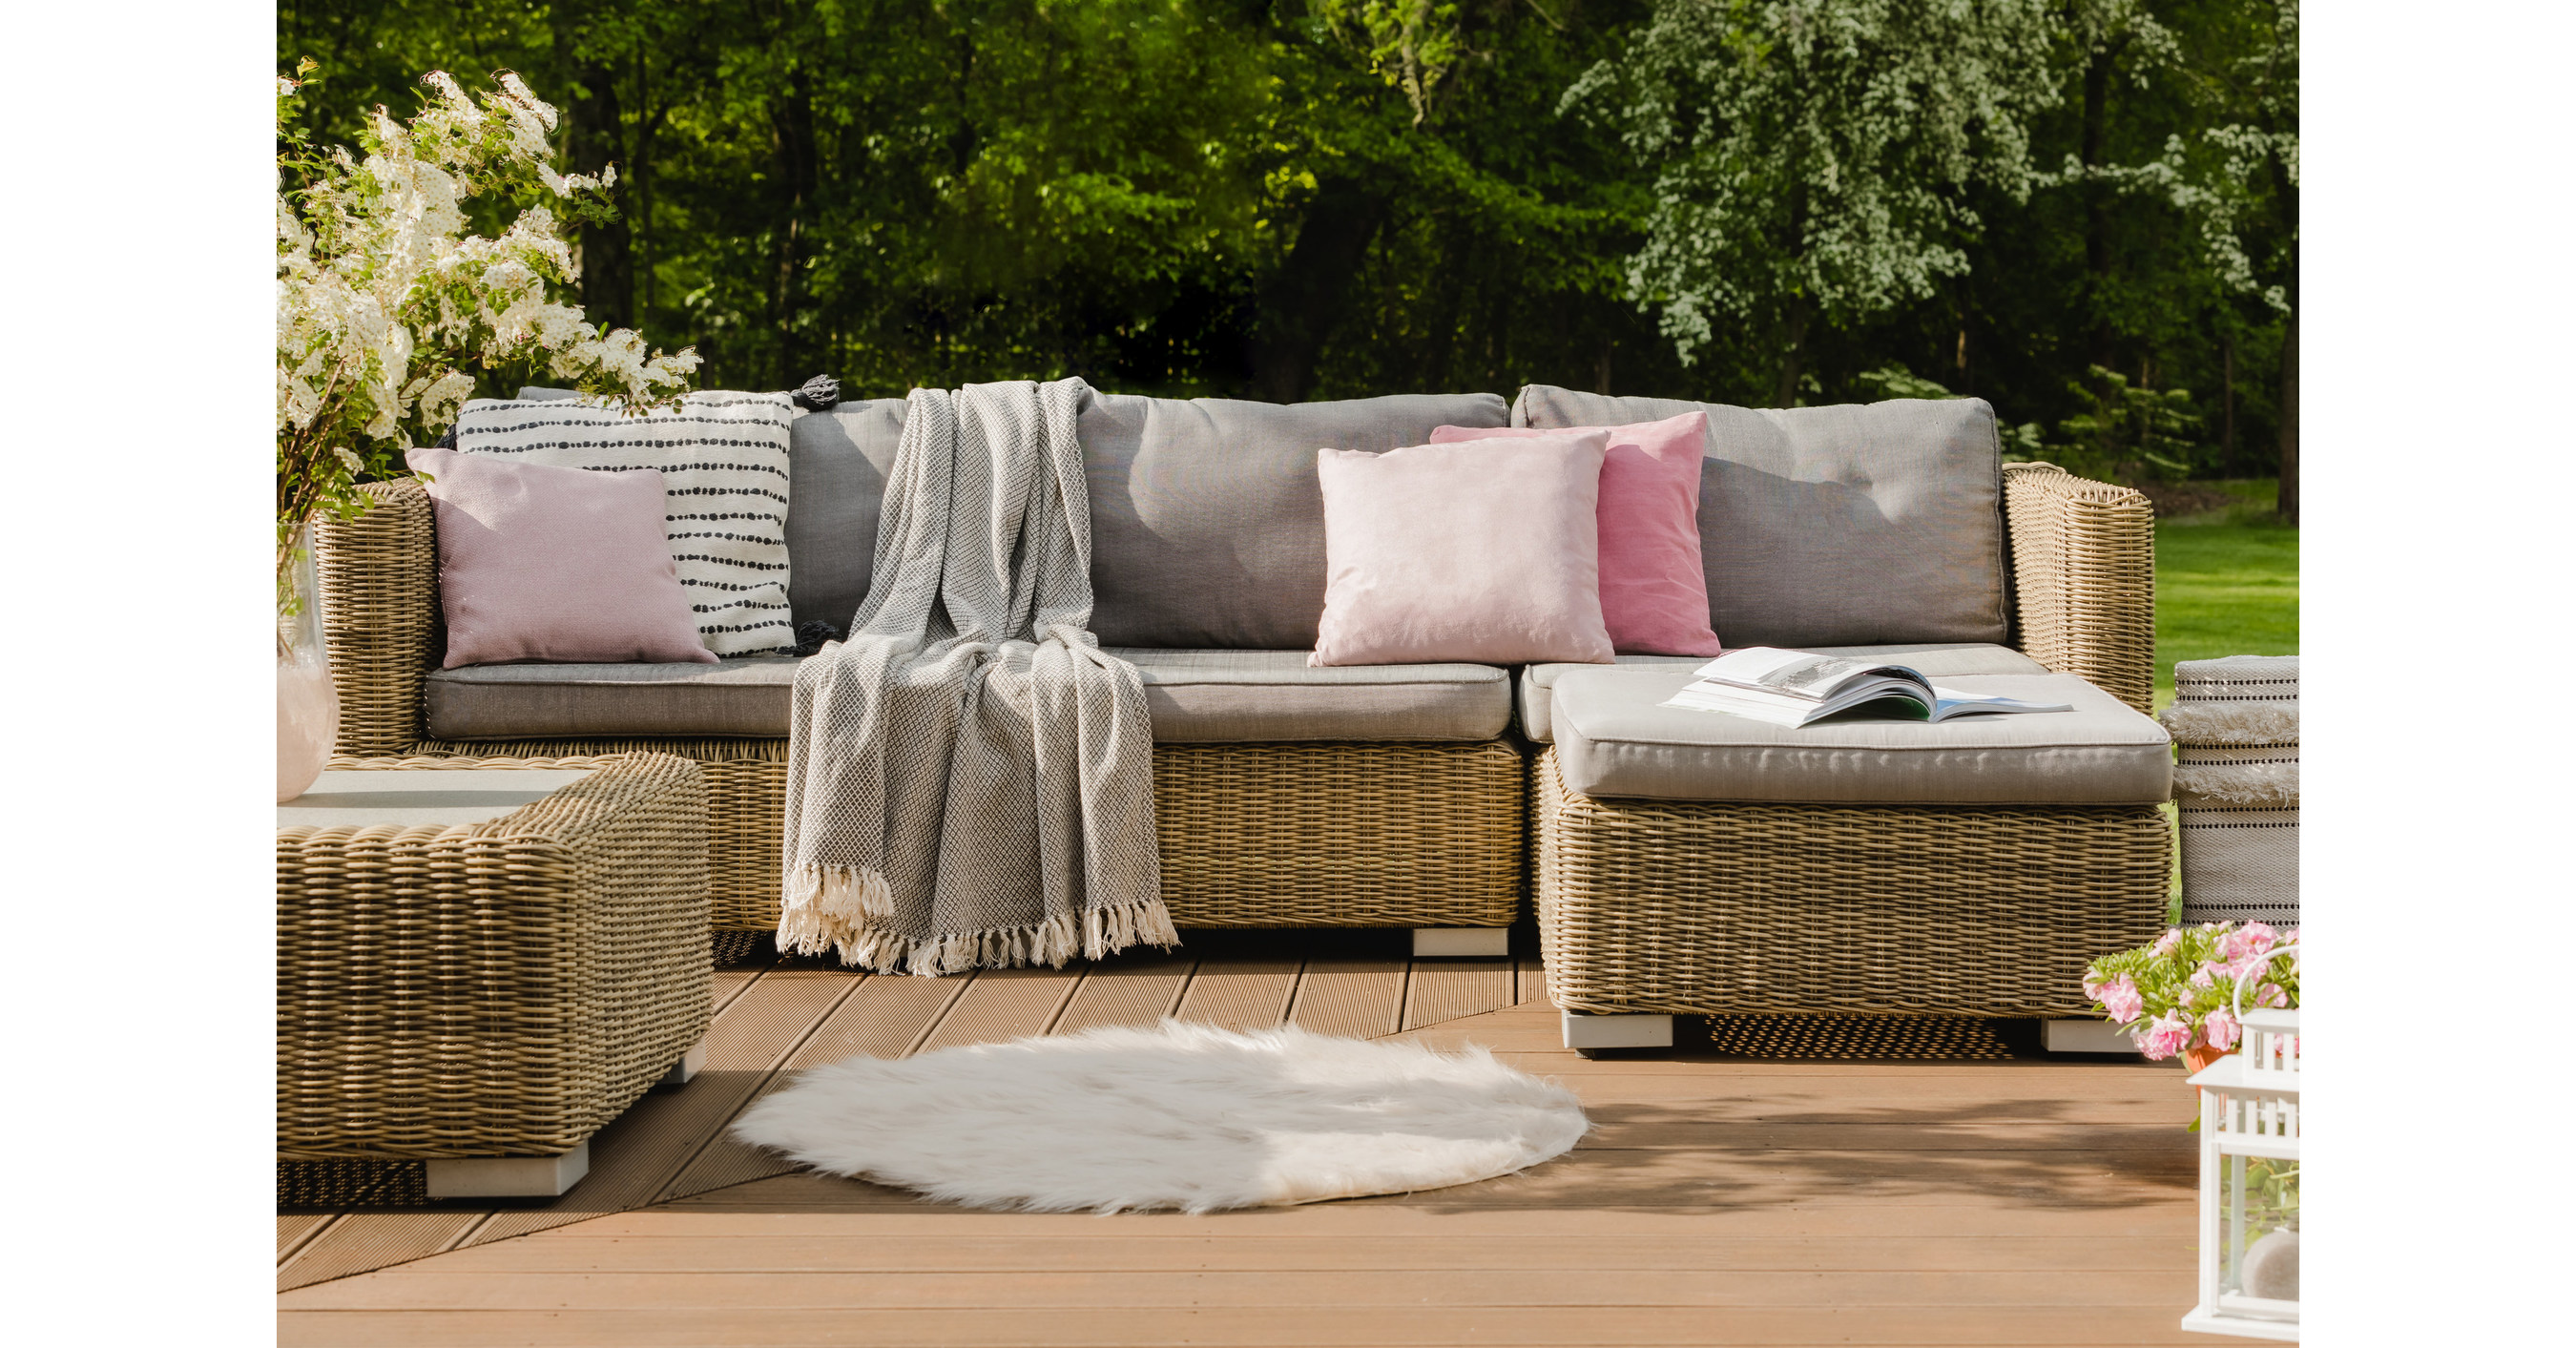 5 Ways to Perk Up Your Patio This Spring with aerMist